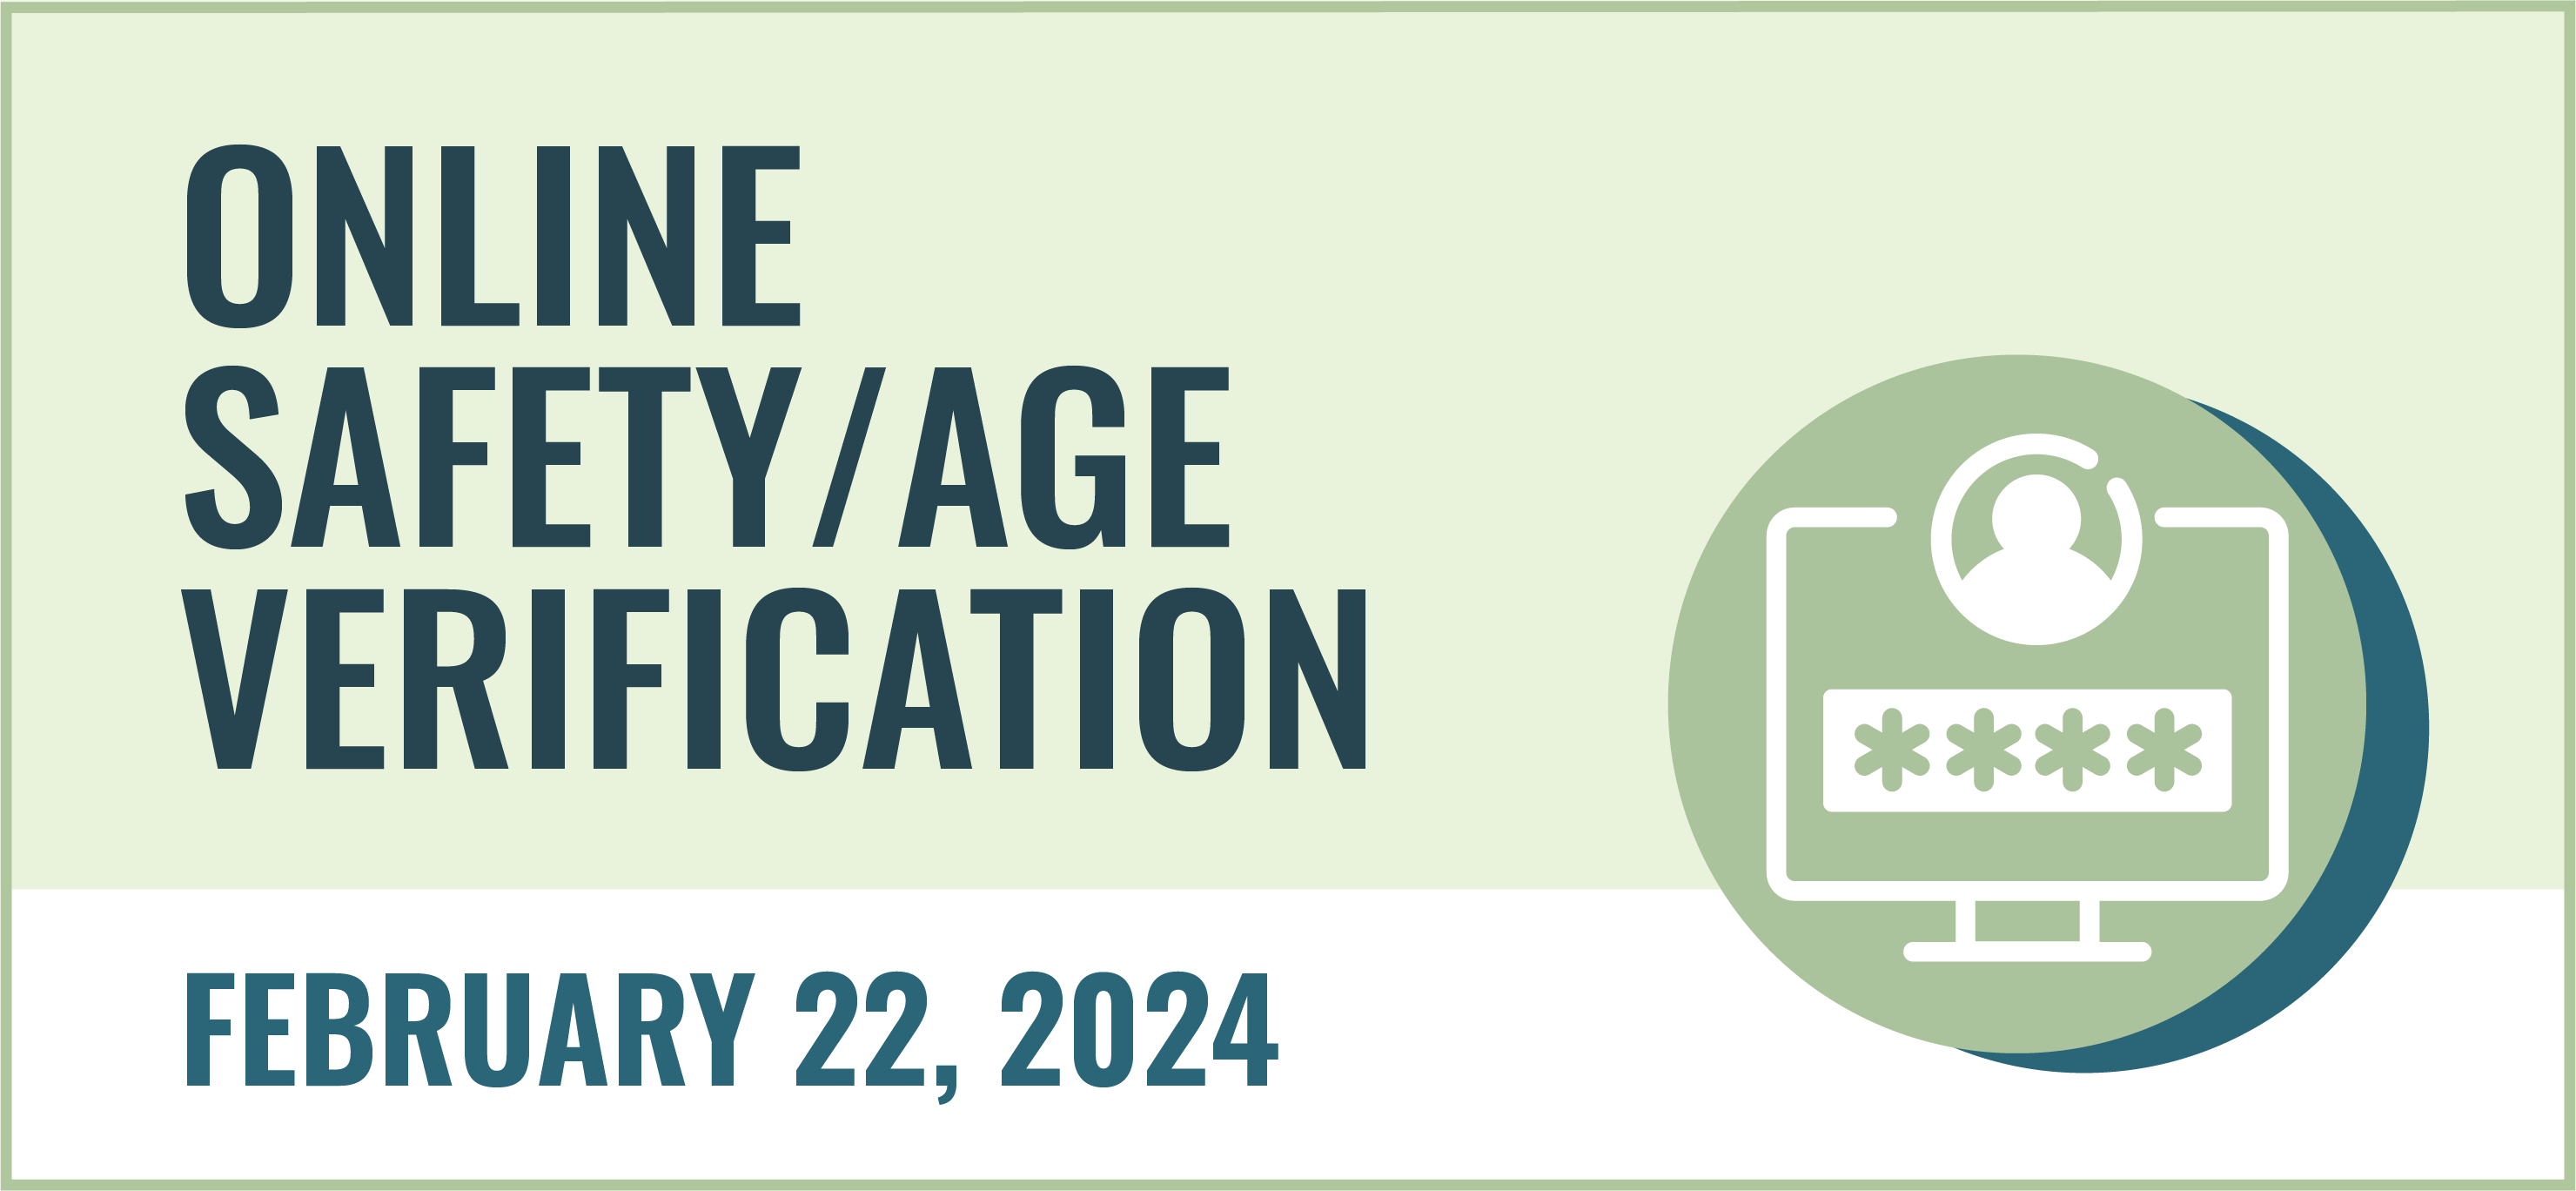 Online Safety/Age Verification. February 22, 2024.